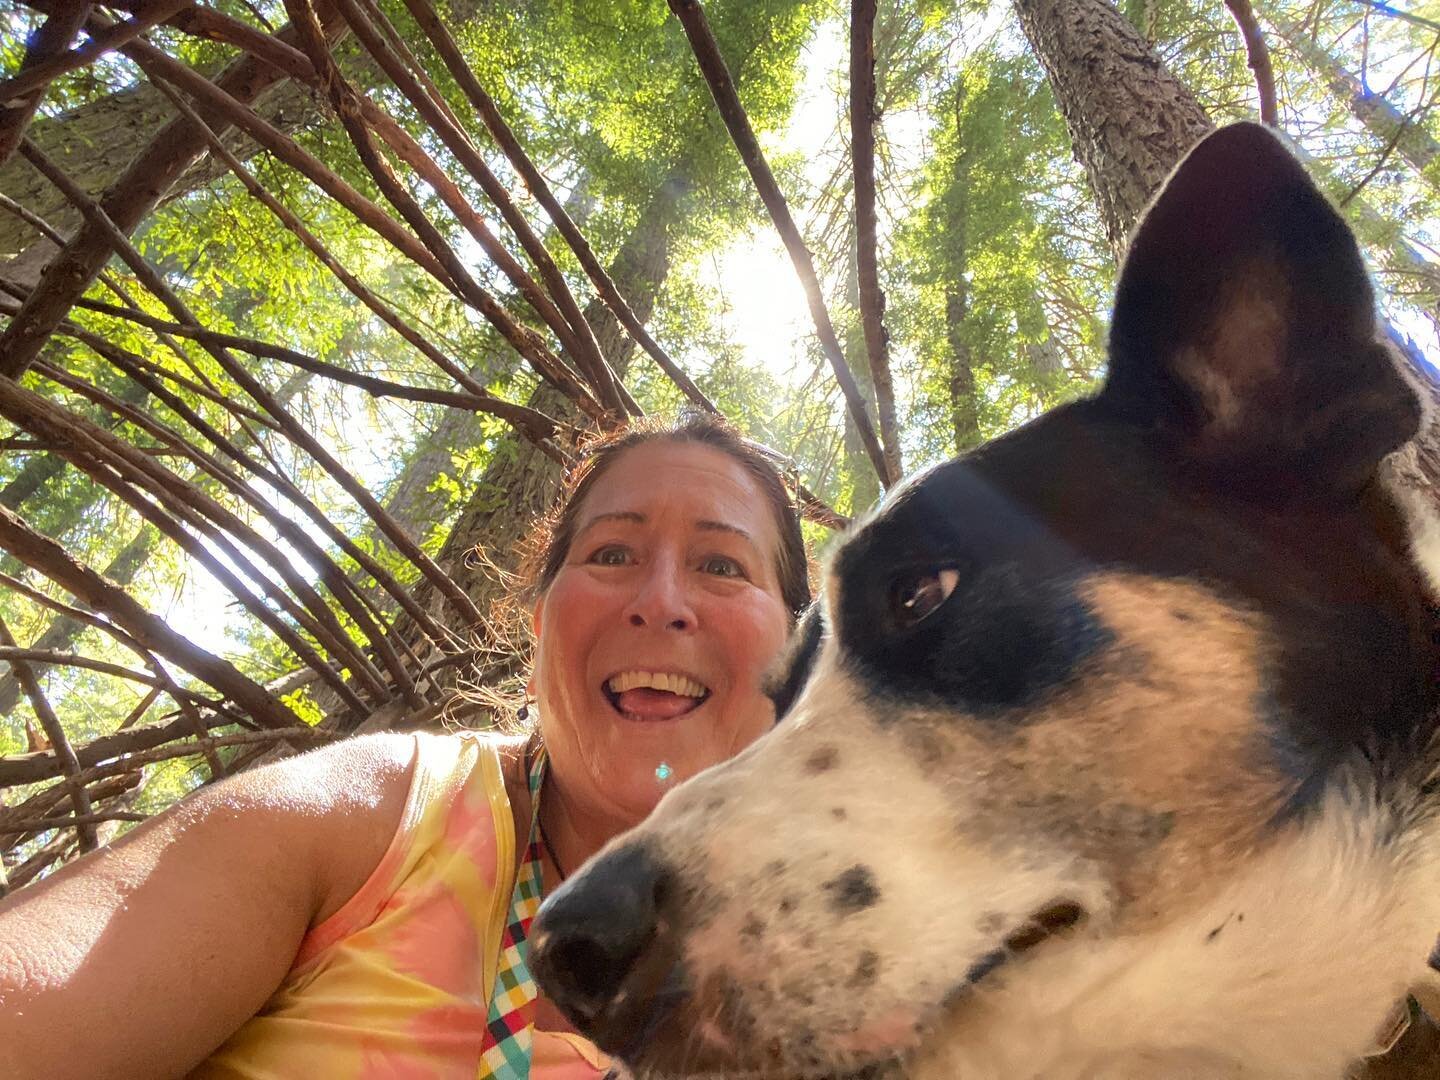 Going into the woods with Laika is always a fun adventure. She is such a good companion! #laika #wickiup #joaquinmillerpark #pawsup🐾 #pawsup4pets